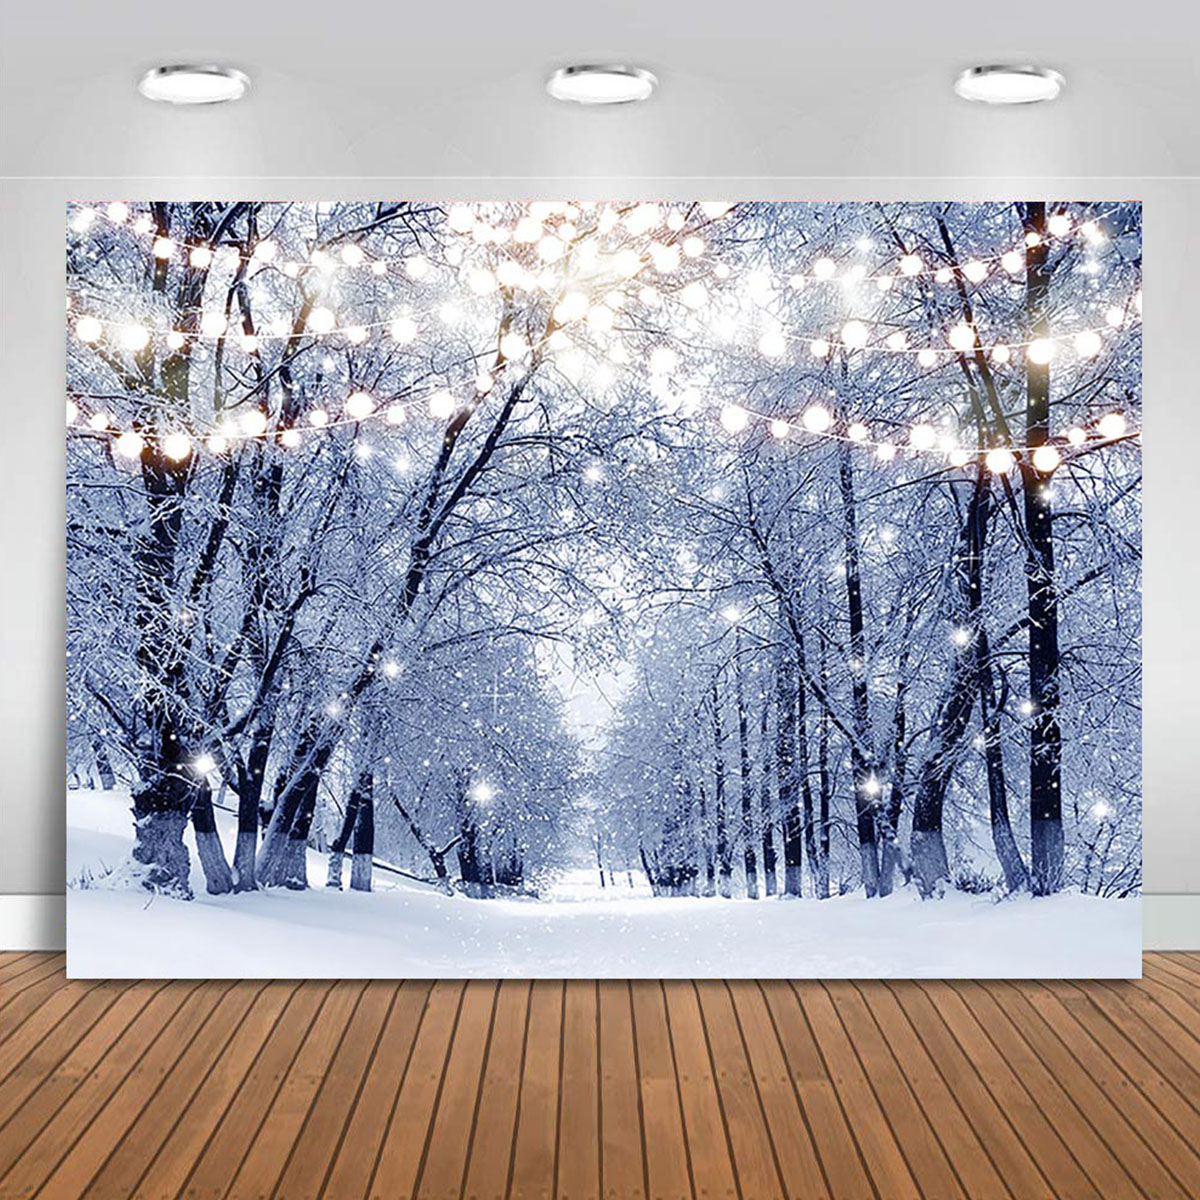 5x3FT-7x5FT-8x6FT-Light-Strip-Winter-Snow-Forest-Street-Photography-Backdrop-Background-Studio-Prop-1609475-3